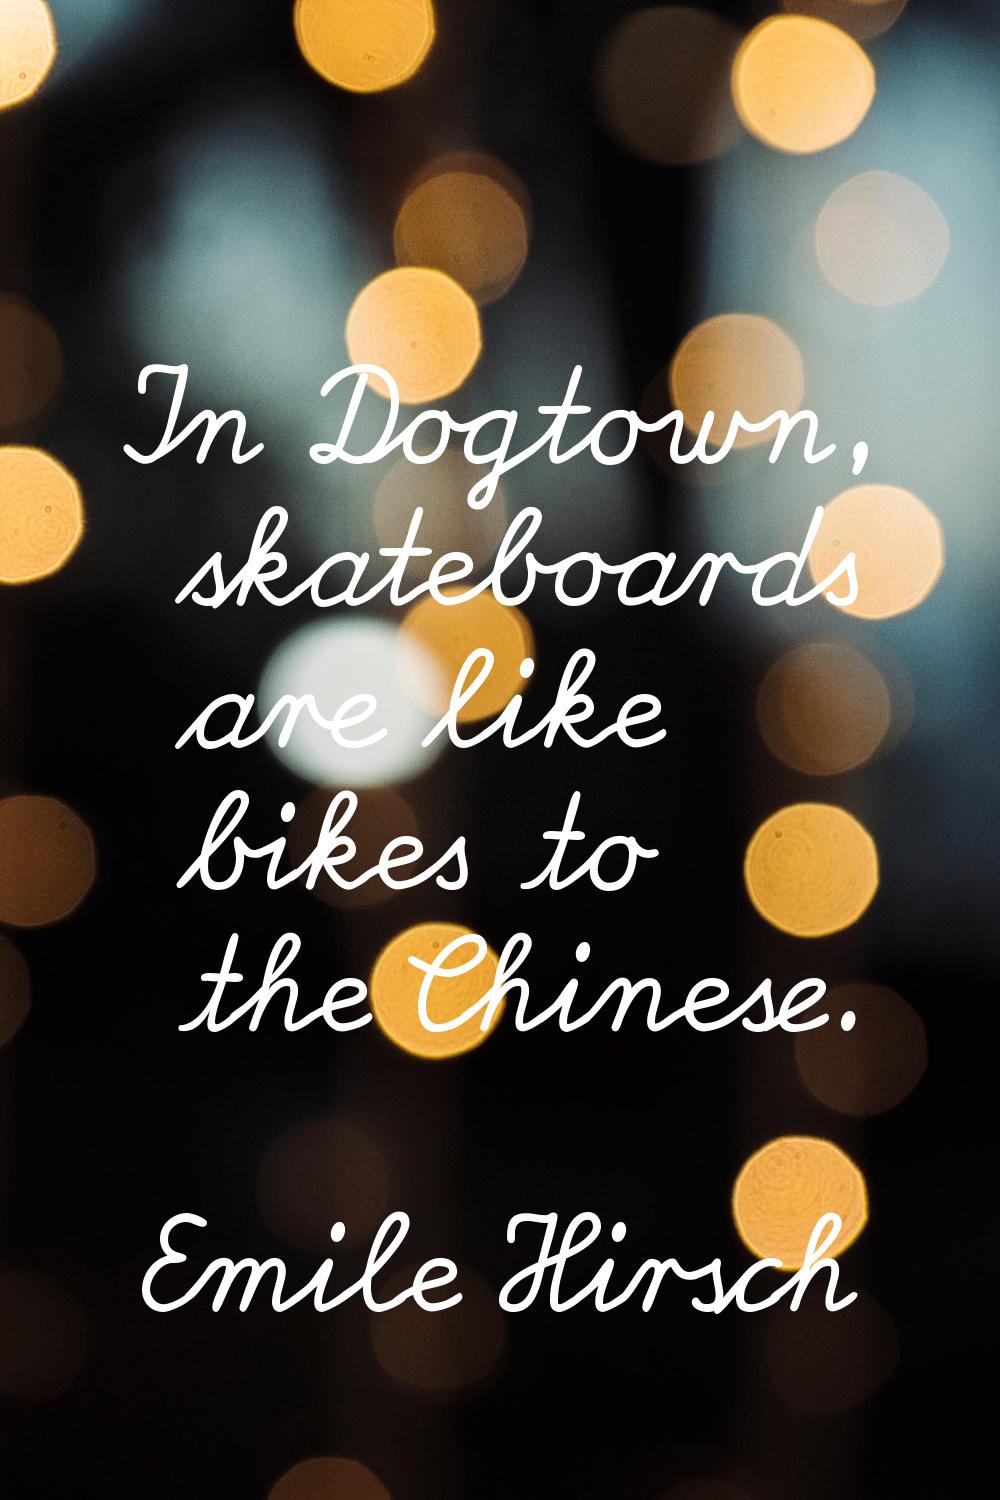 In Dogtown, skateboards are like bikes to the Chinese.